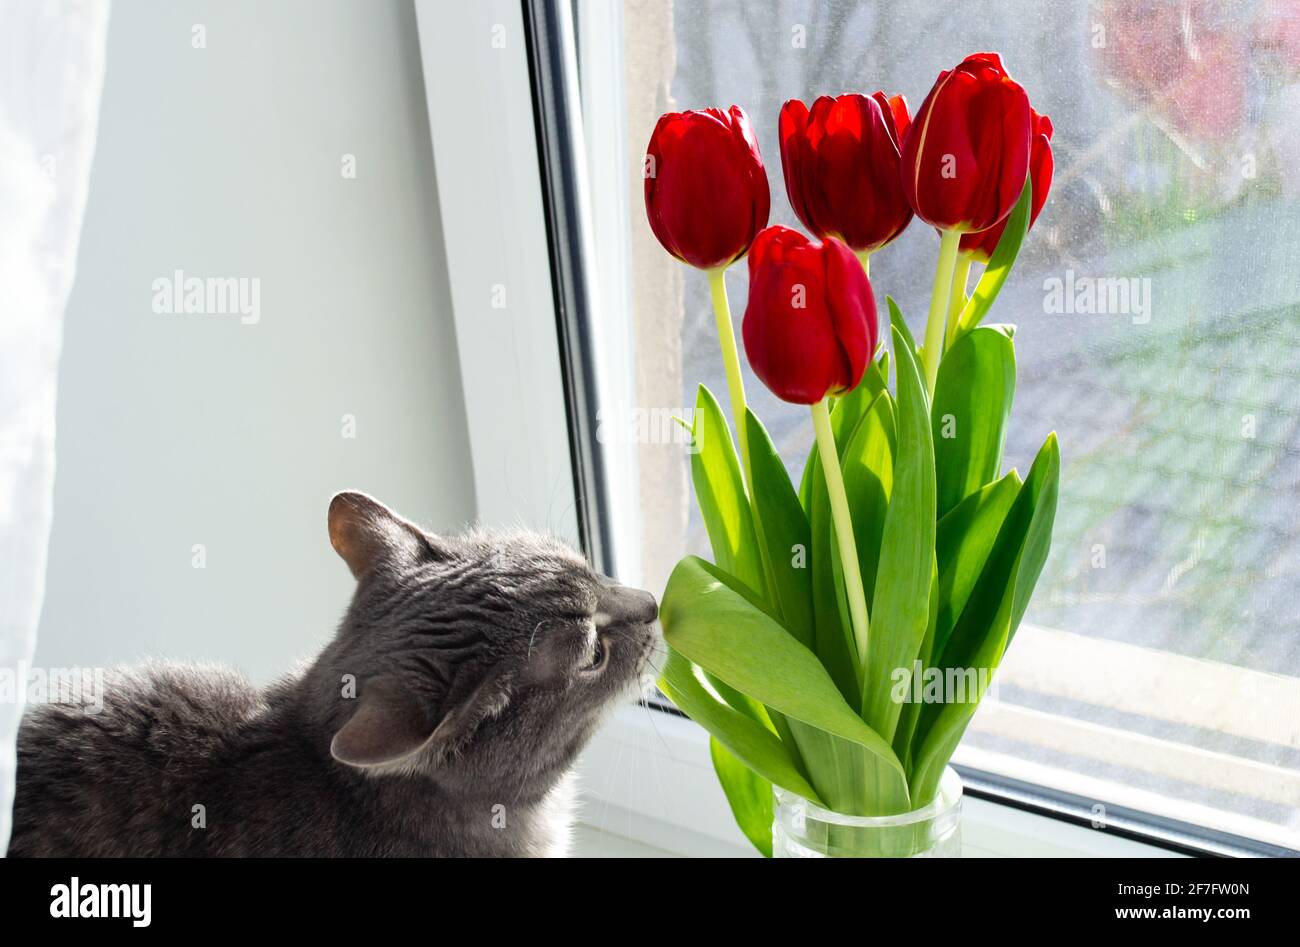 A gray cat sits on the windowsill and sniffs a leaf from a bouquet of red tulips. Stock Photo